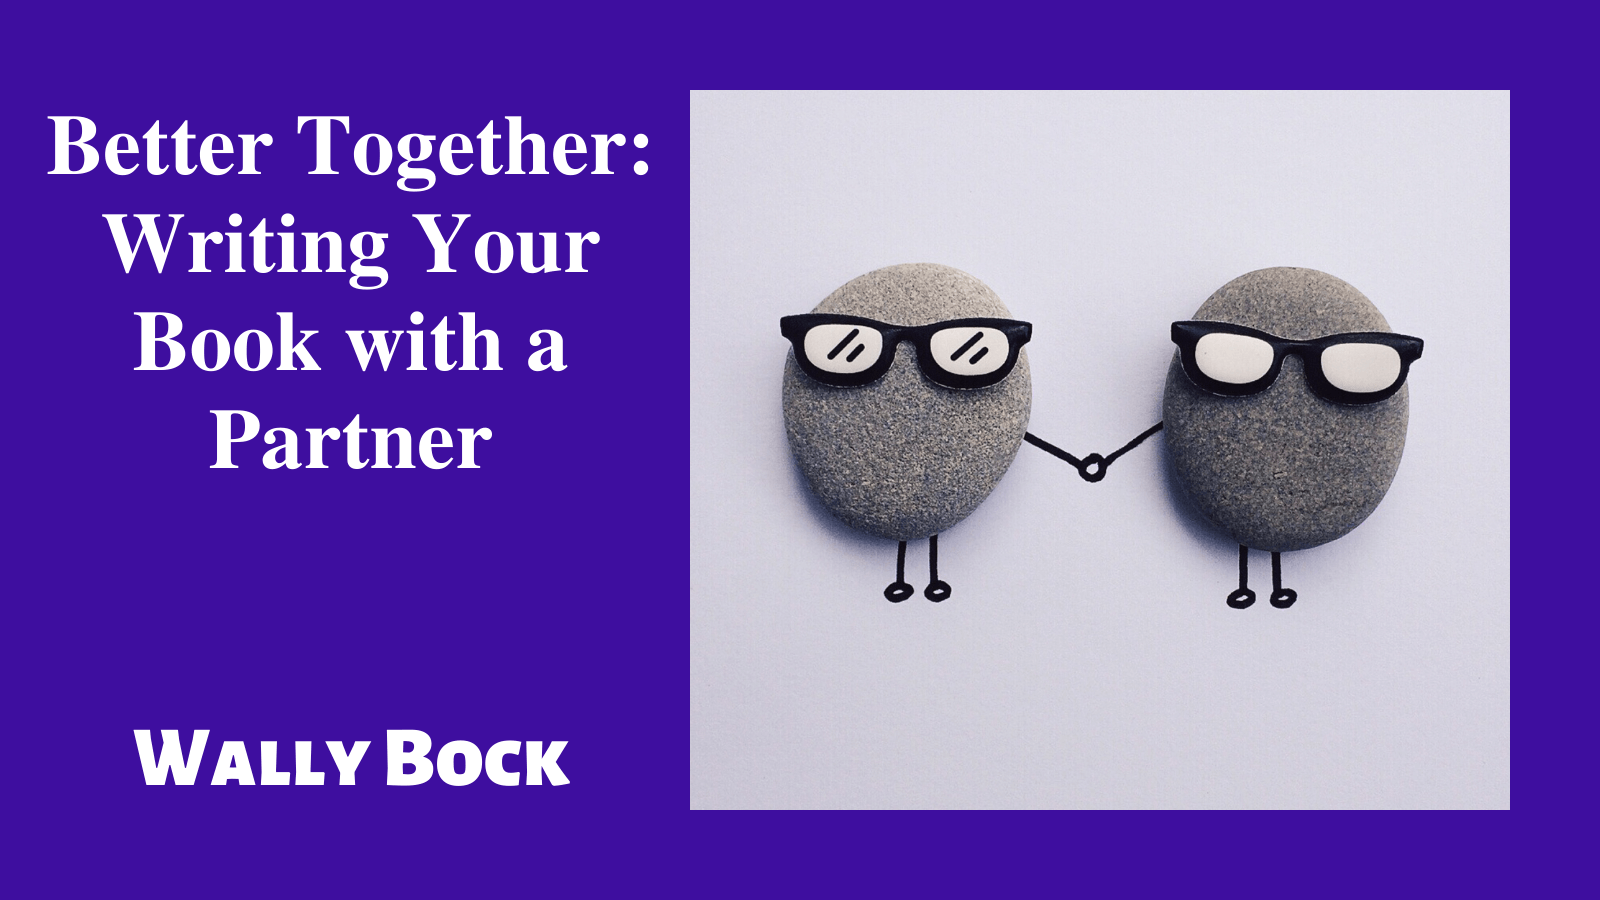 Better Together: Writing Your Book with a Partner